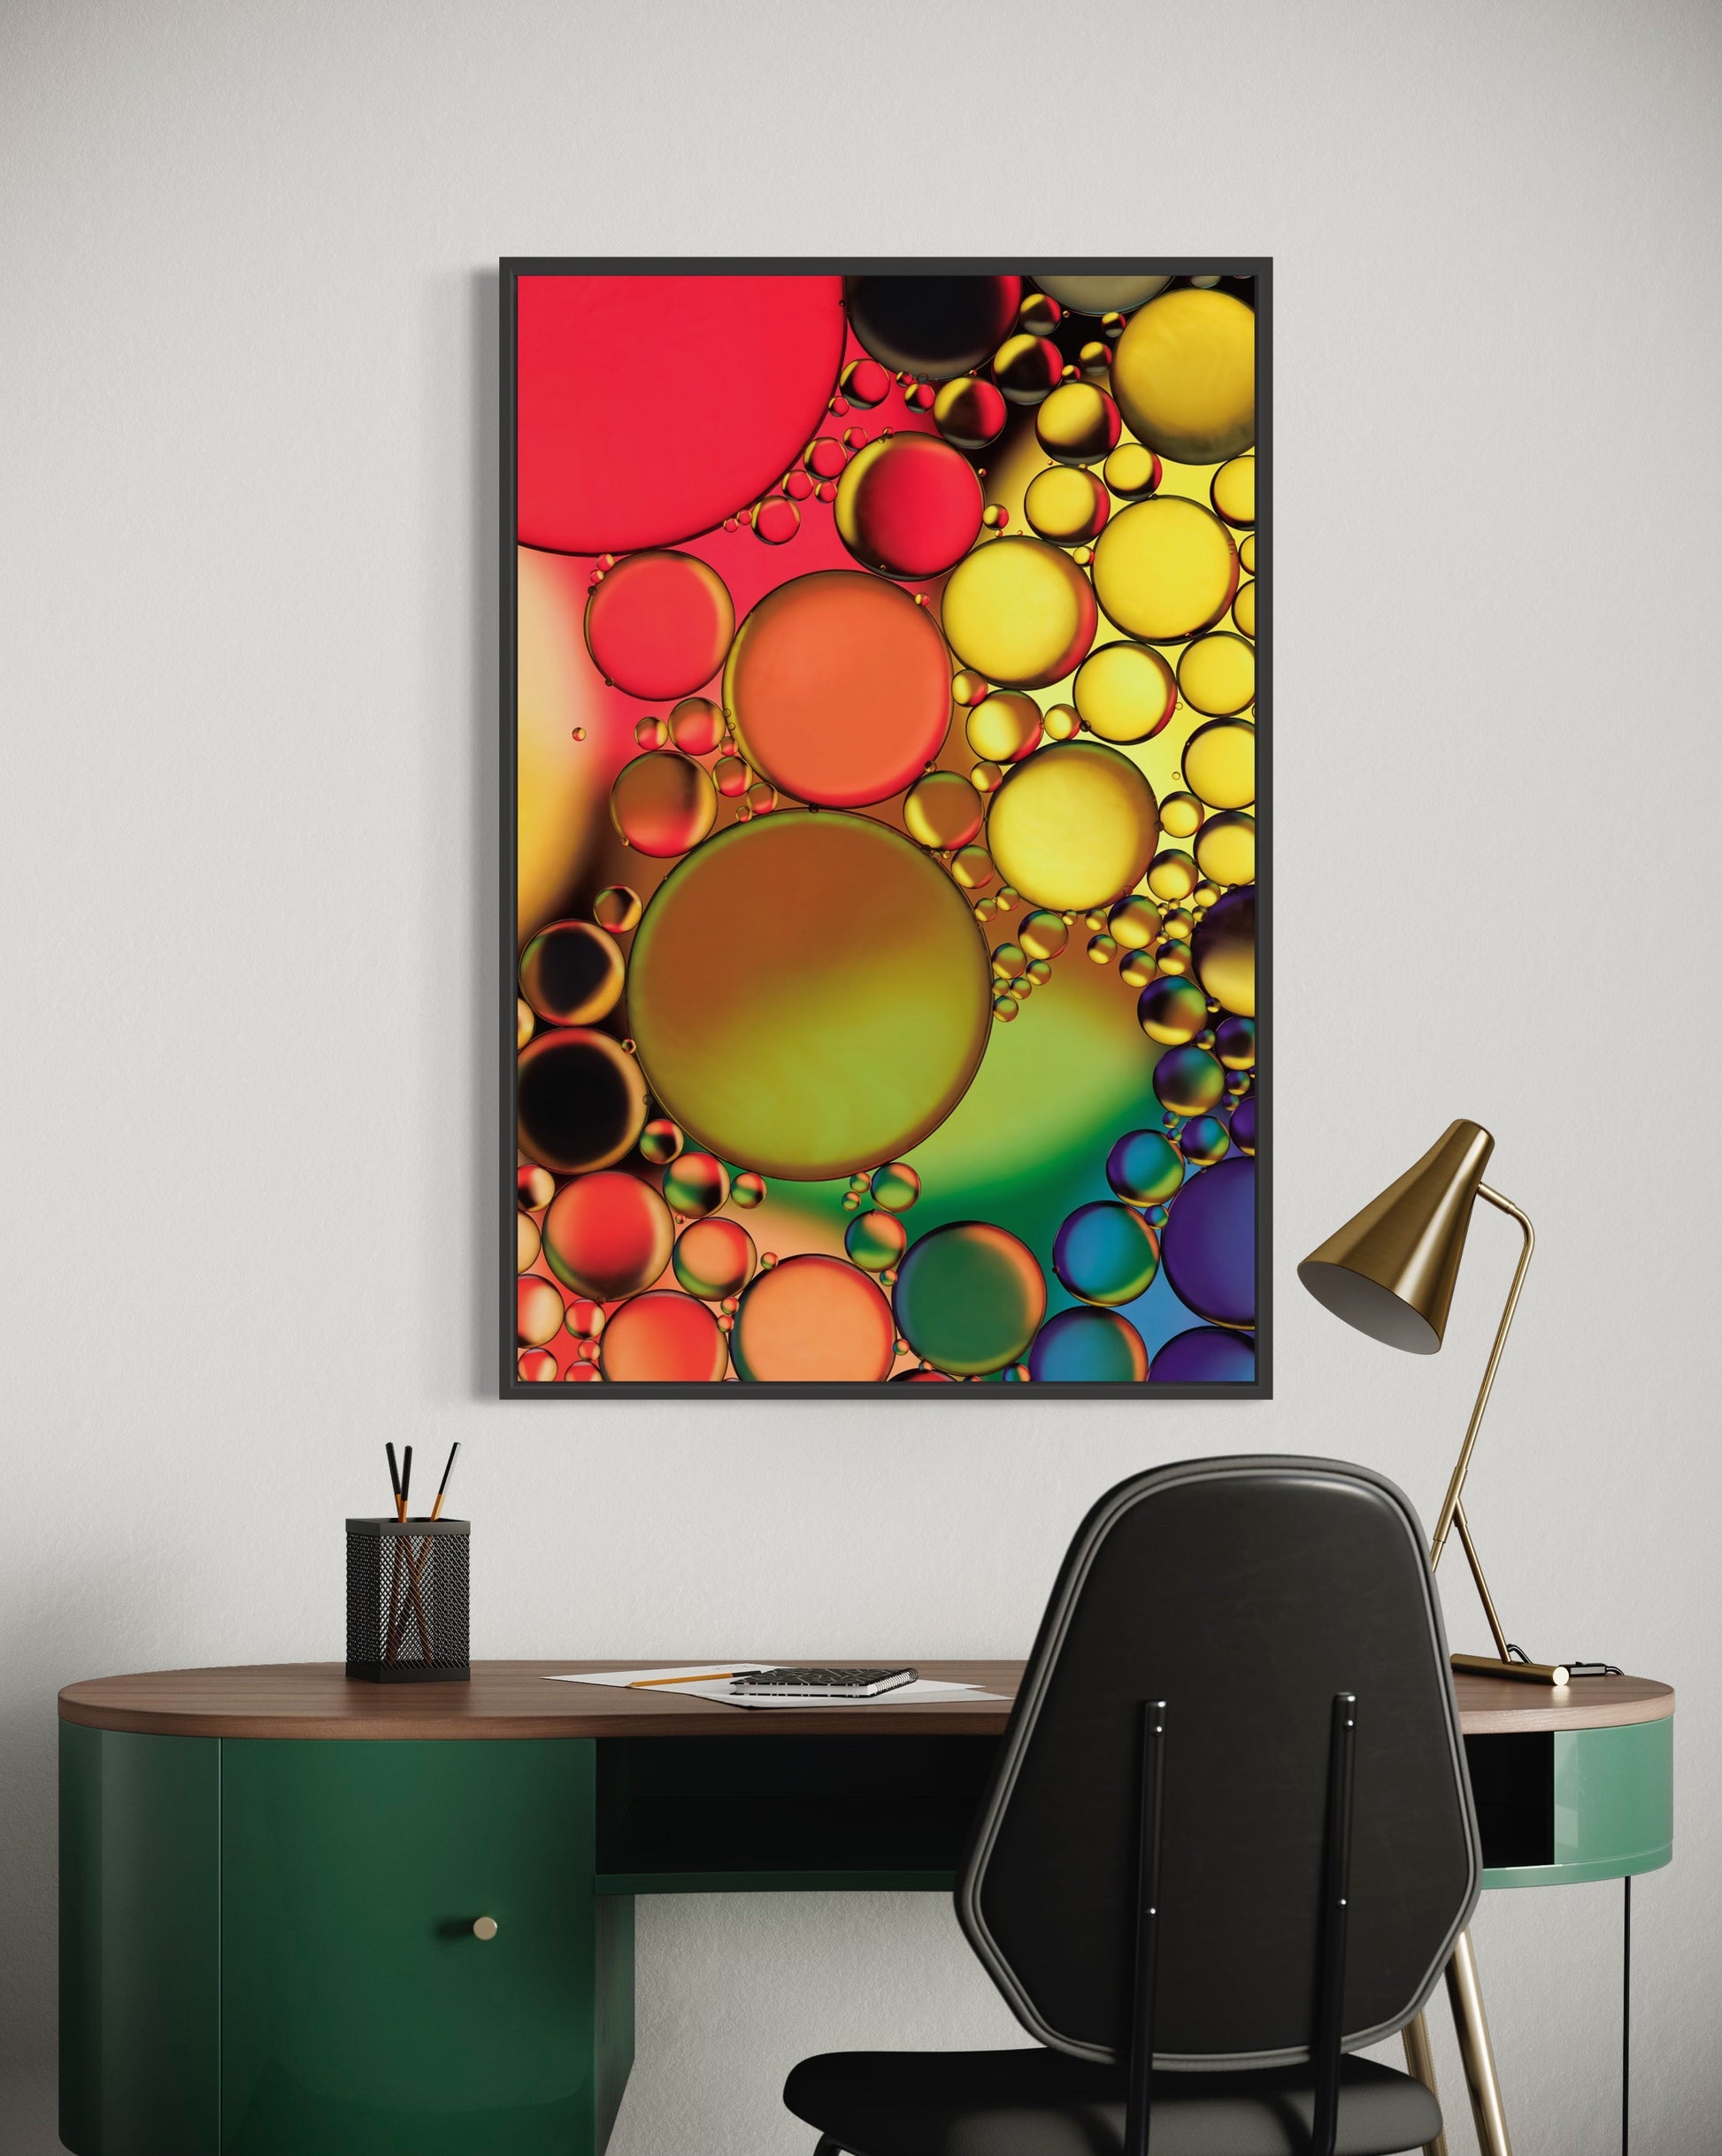 Abstract photograph titled "Jewels" featuring an interplay of oil and water in vibrant orange, yellow, green, blue, and purple hues, printed on high-grade photo paper and mounted under acrylic for depth and clarity. The predominant elements of this image are circular forms and vibrant hues.  The image shows the print hanging over a green desk. 